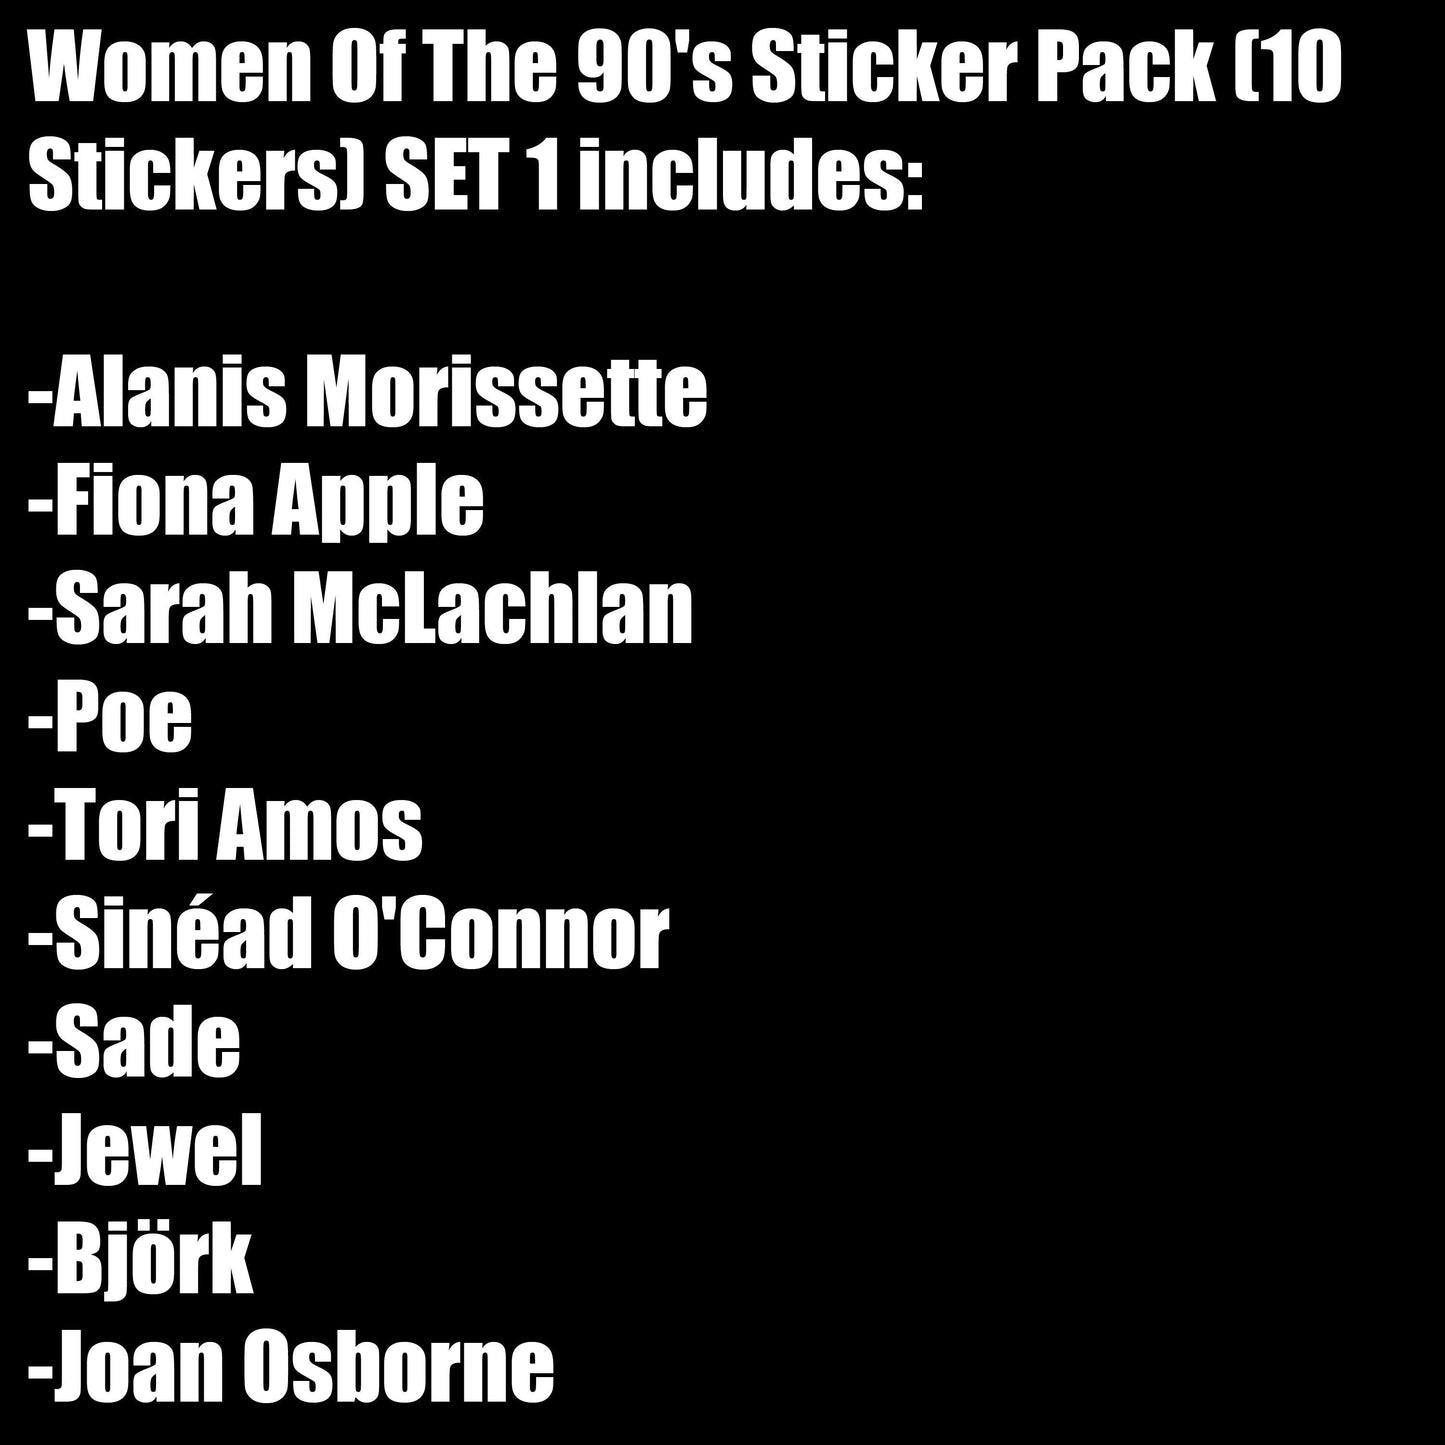 Women Of The 90's Sticker Pack (10 Stickers) SET 1